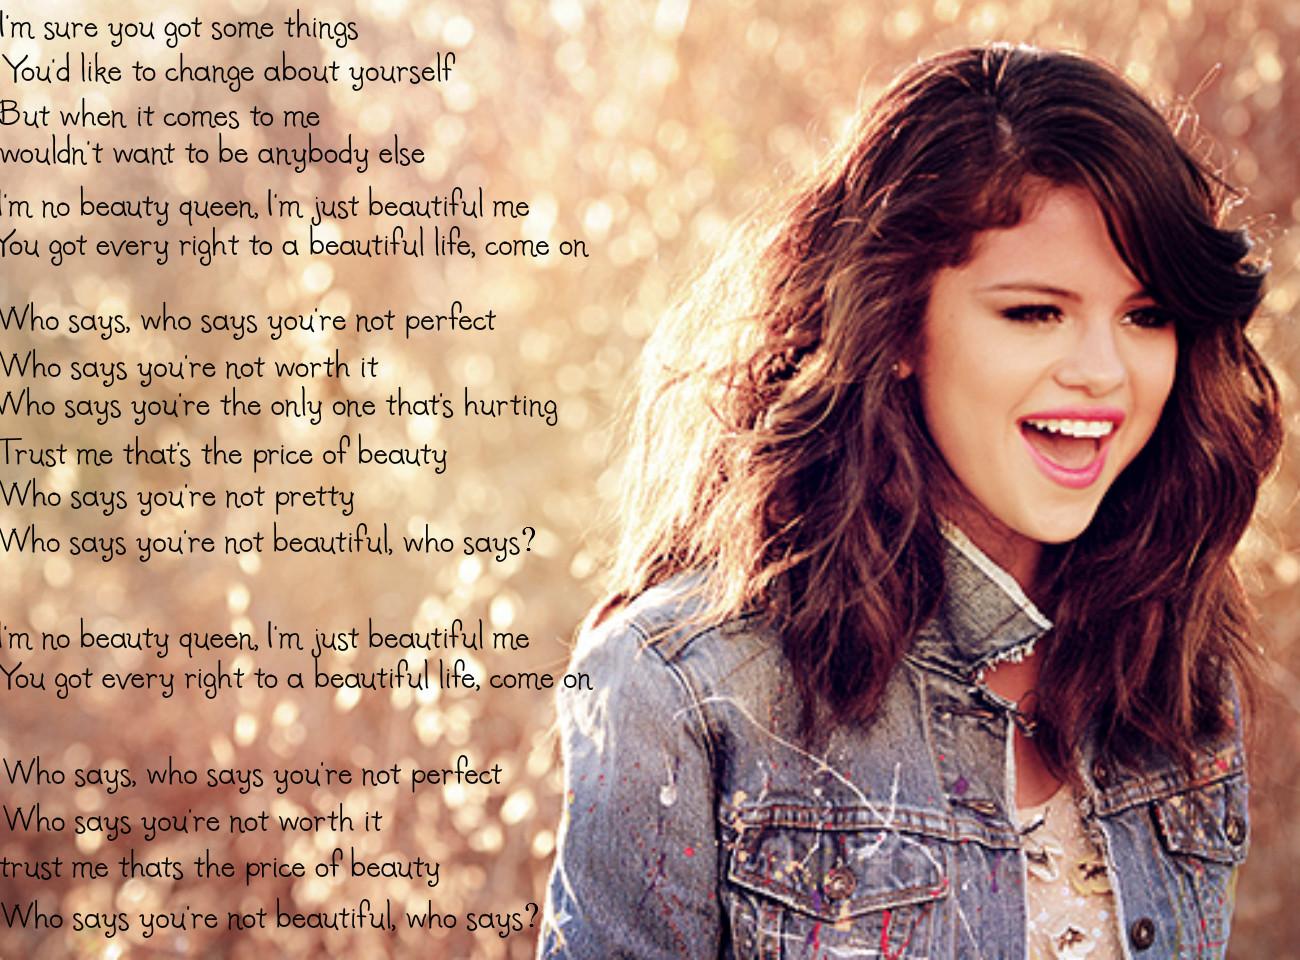 “Who Says” Song by the Recording Artist Selena Gomez – You Got Every